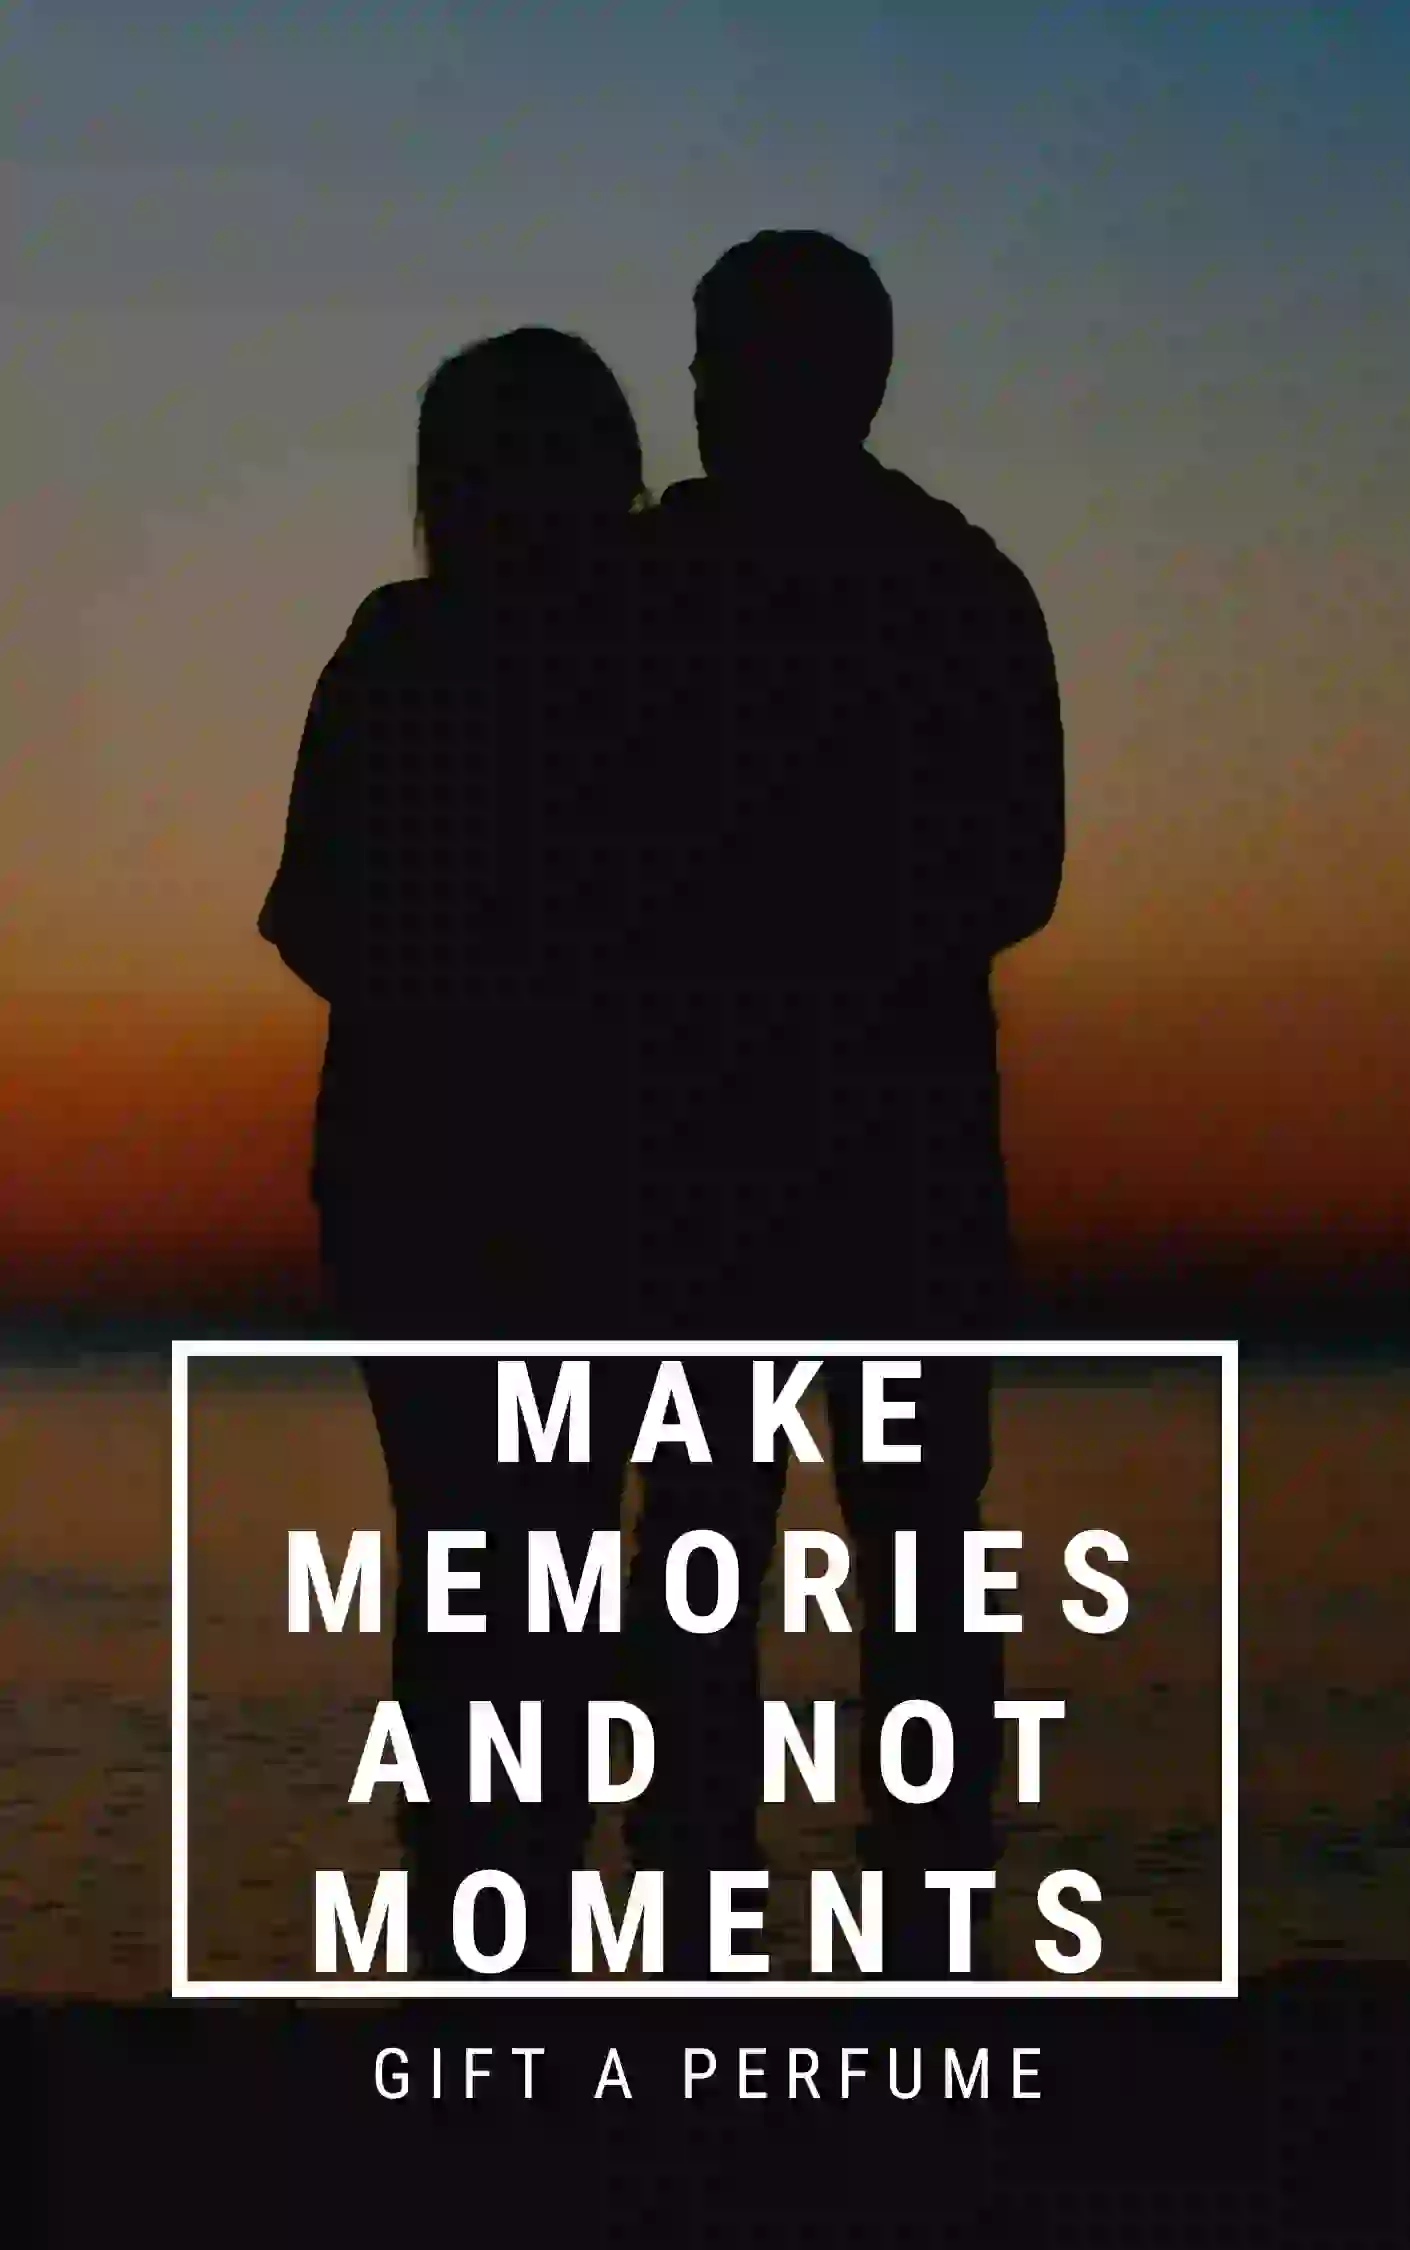 Perfume as a gift makes memories and people associate a smell with a person. The picture shows silhouette of a man and women in a moment.